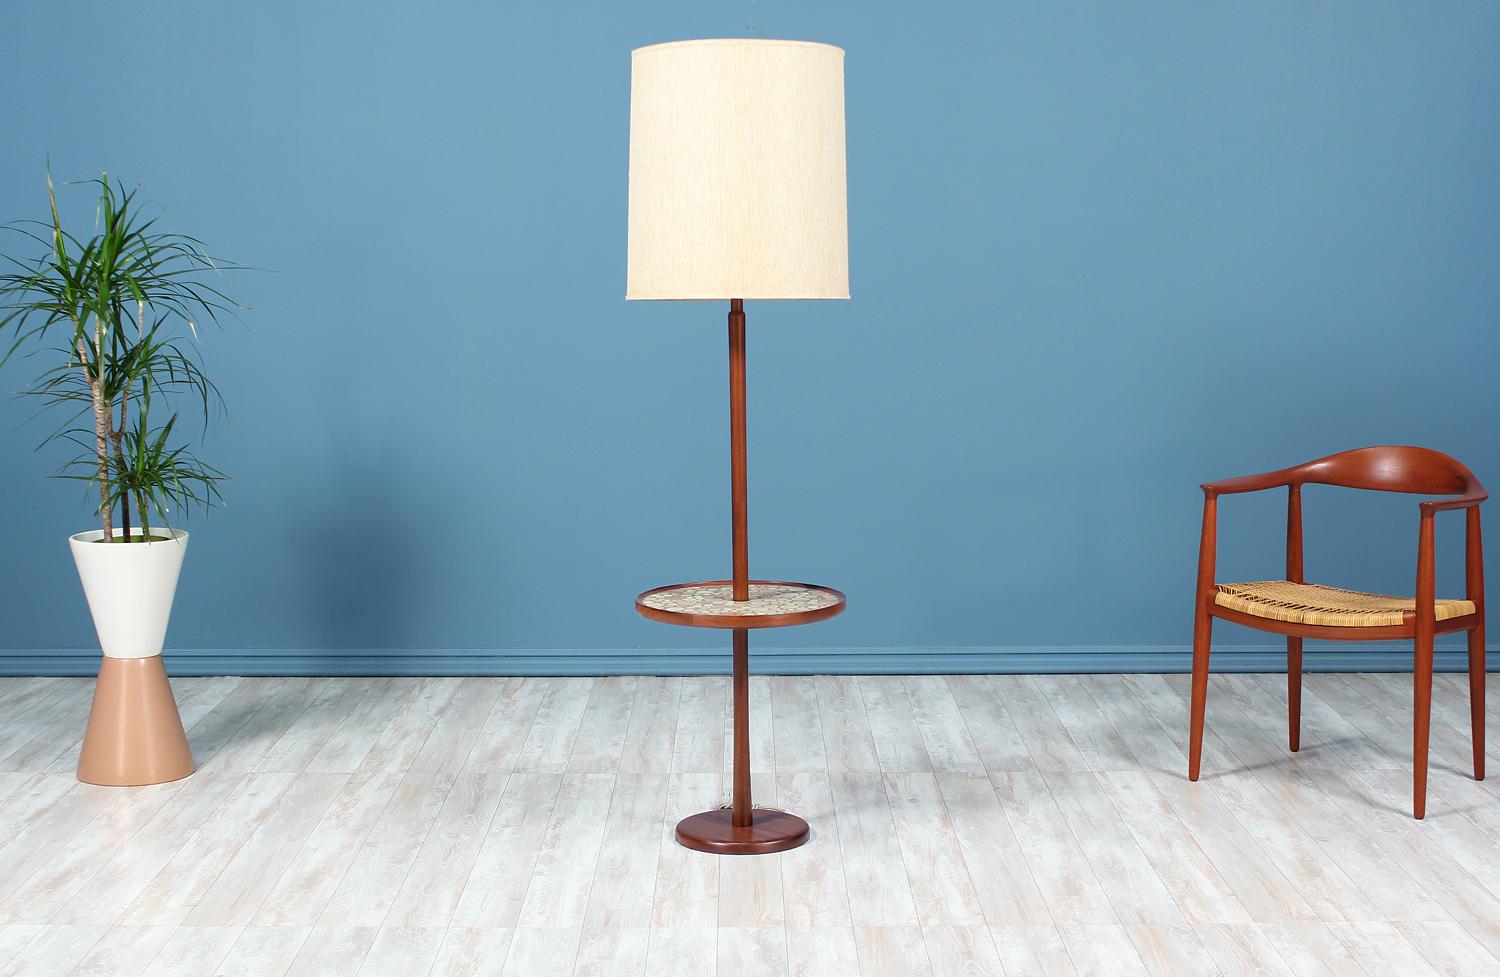 Dazzling floor lamp side table designed by Jane & Gordon Martz for Marshall Studios in the United States circa 1950’s. This stylish lamp features an integrated circular table with ceramic tile inlay in earthy tones that pair beautifully with the